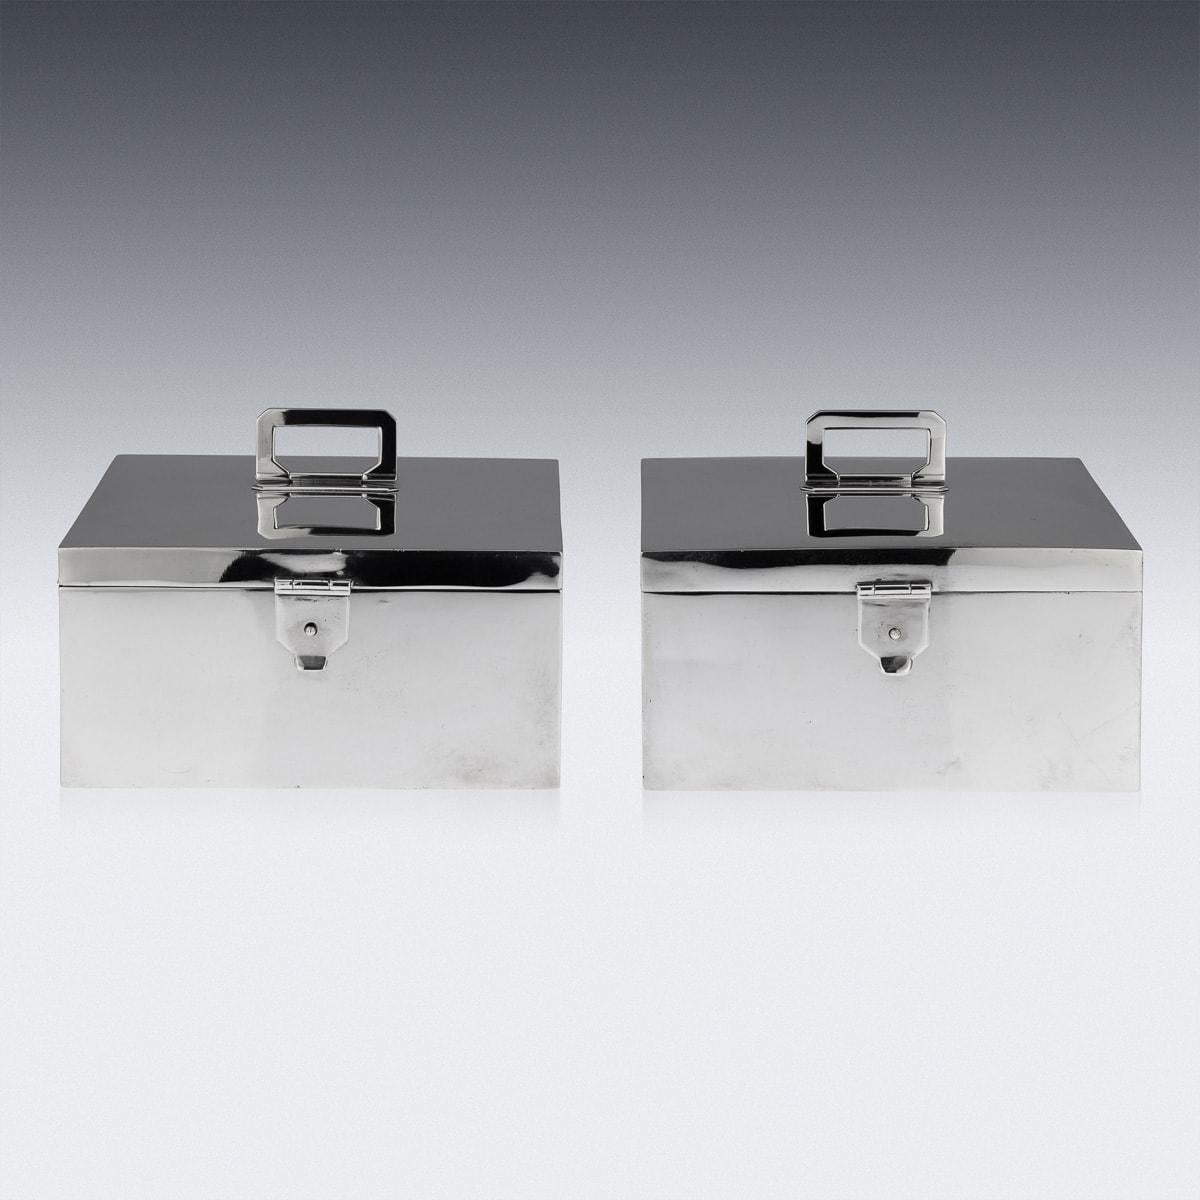 British 20th Century Art Deco Pair Of Solid Silver Cigar Boxes, Asprey & Co, c.1936 For Sale